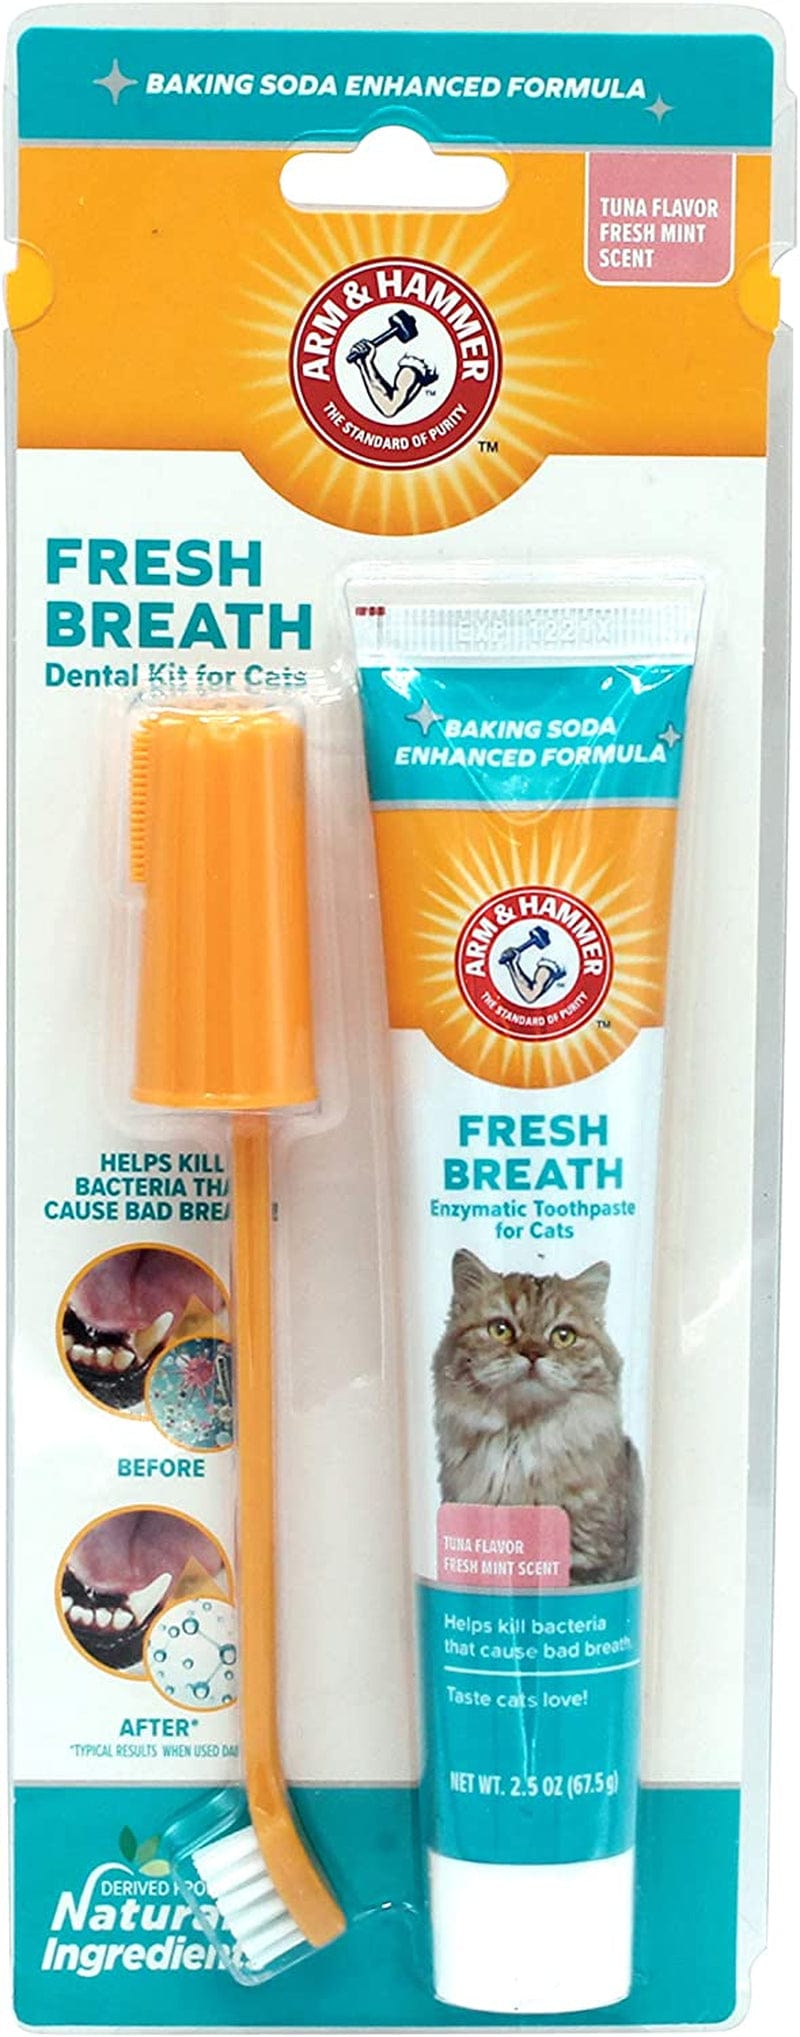 Arm & Hammer for Pets Dental Kit for Cats | Eliminates Bad Breath | 3 Piece Set Includes Cat Toothpaste, Cat Toothbrush & Cat Fingerbrush in Tasty Tuna Flavor,2.5 Ounces